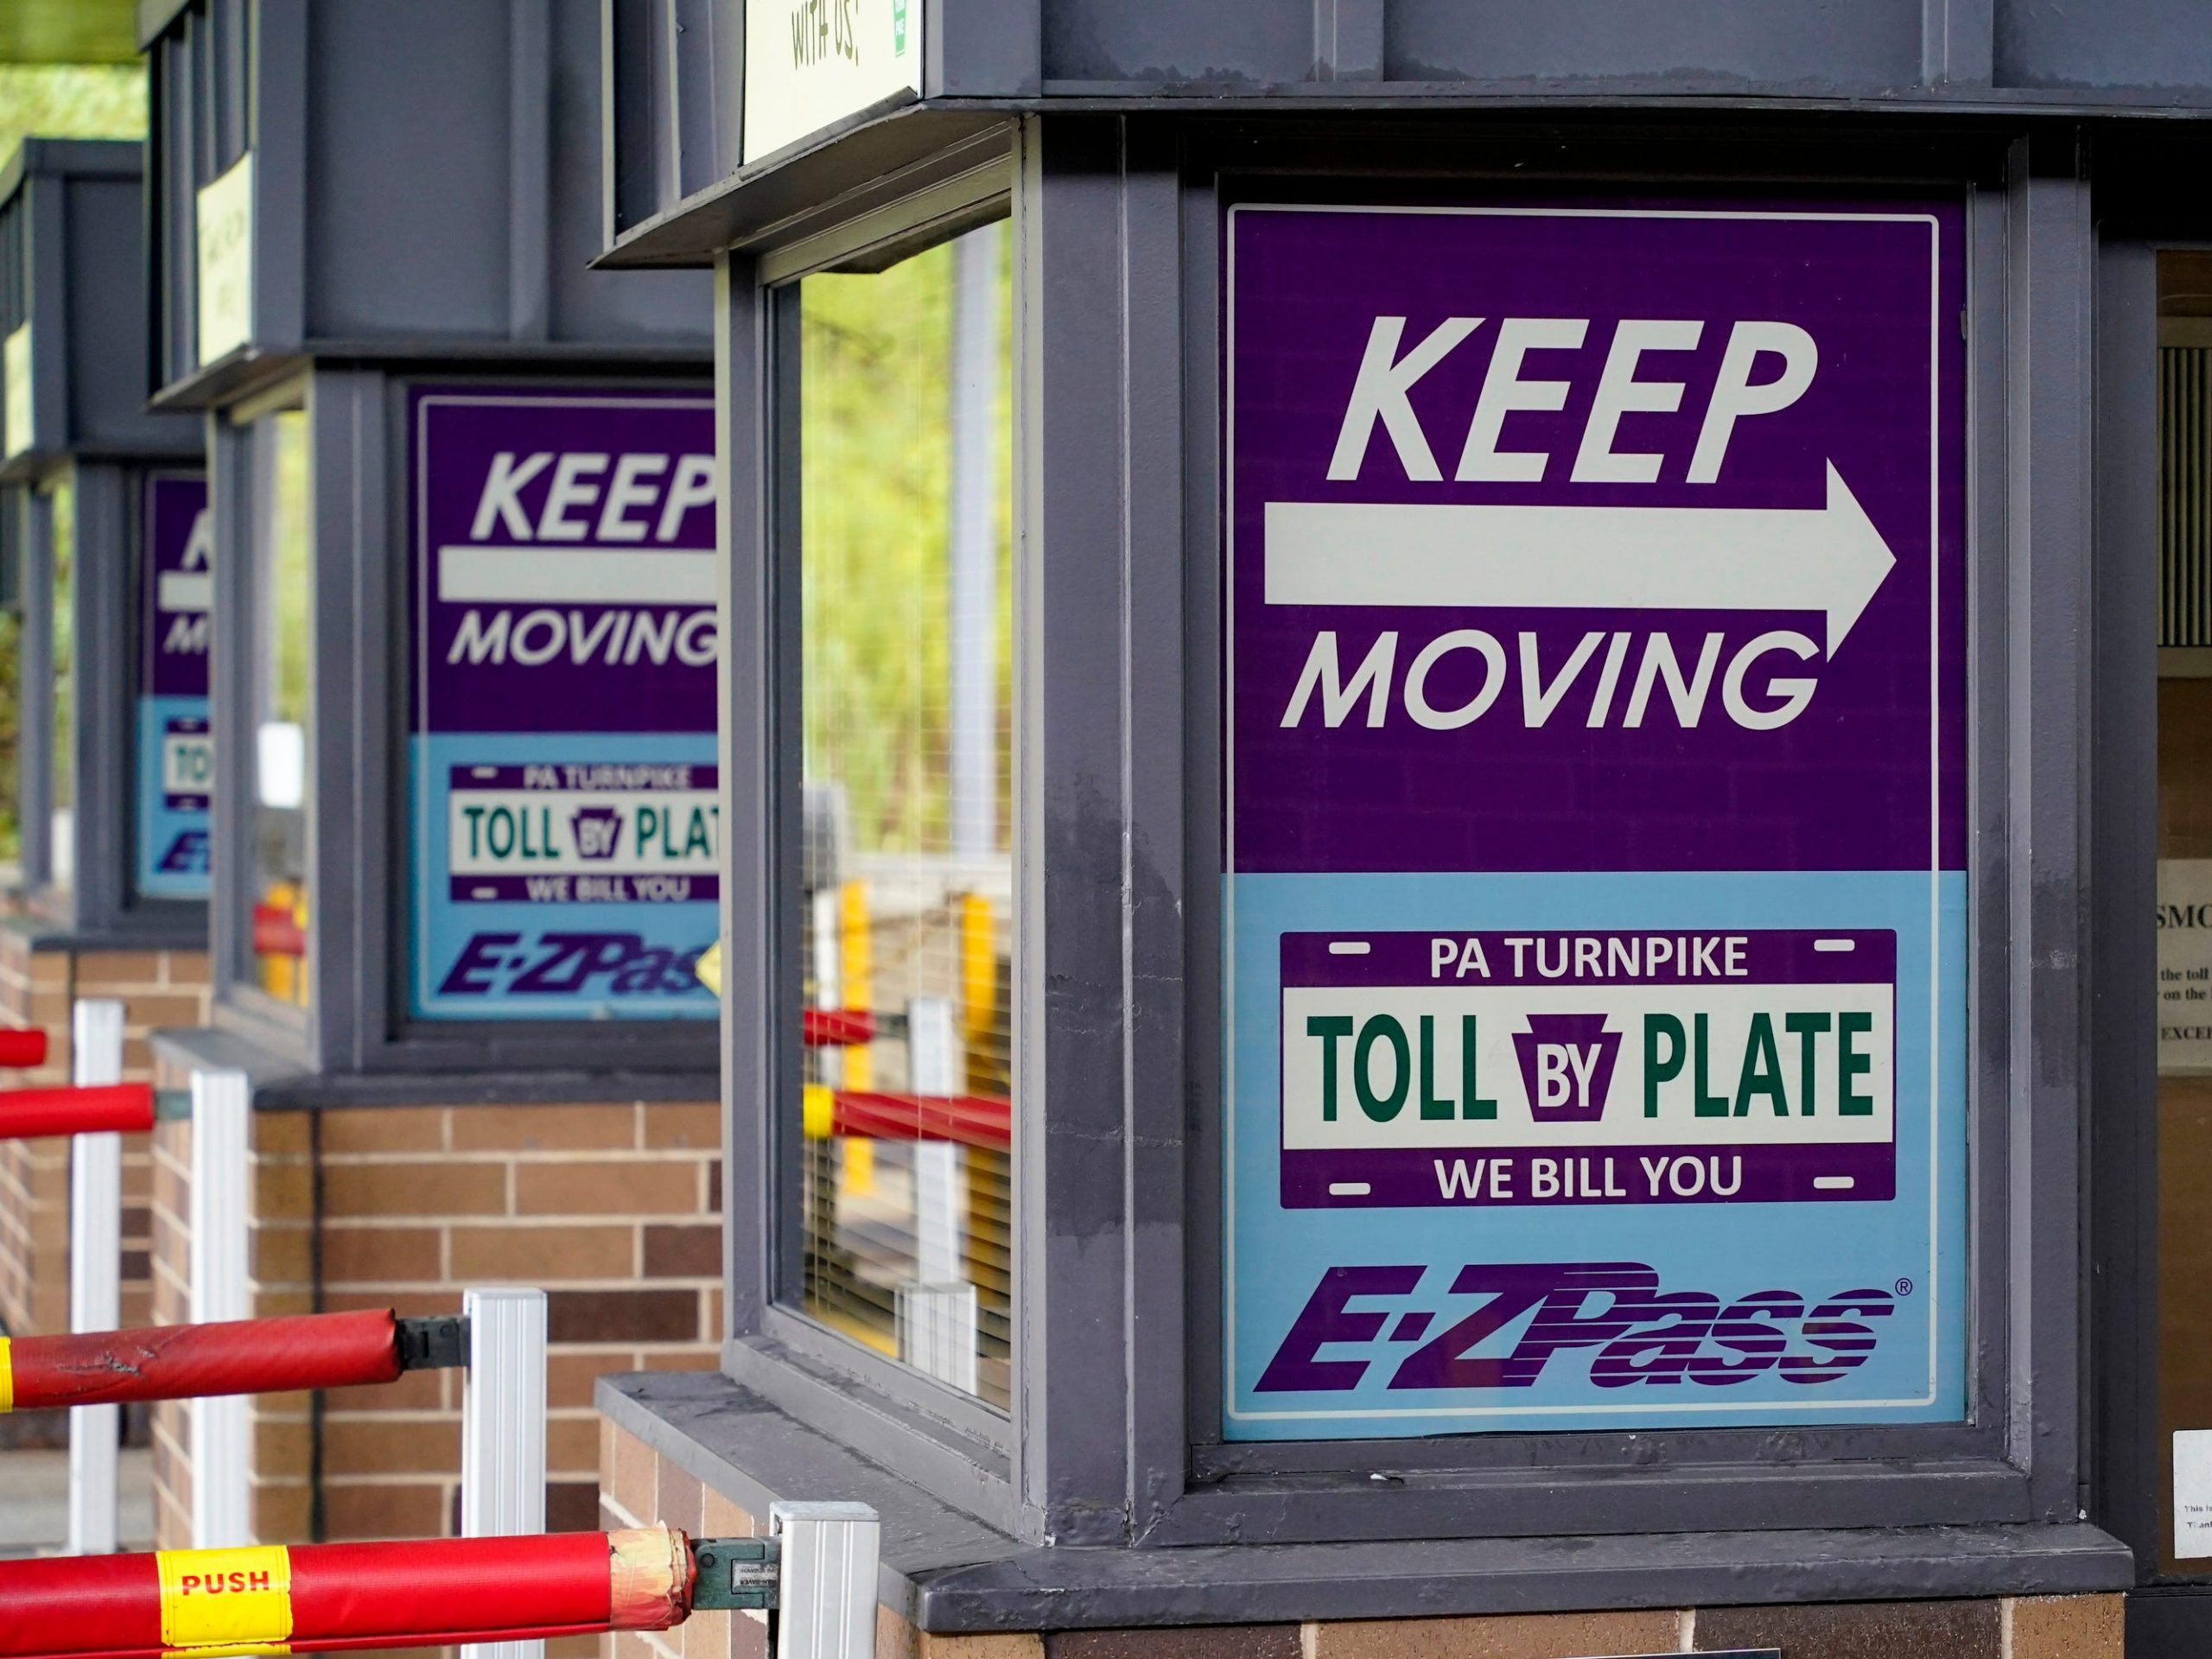 Signs on the electronic toll booths indicate to motorists entering the Pennsylvania Turnpike in Gibsonia, Pa. on Monday, Aug. 30, 2021, to keep moving and the methods being used to collect tolls. More than $104 million in Pennsylvania Turnpike tolls went uncollected last year as the agency fully converted to all-electronic tolling. Turnpike records show the millions of motorists who don’t use E-ZPass have a nearly 1 in 2 chance of riding without paying under the “toll-by-plate” license plate reader system.